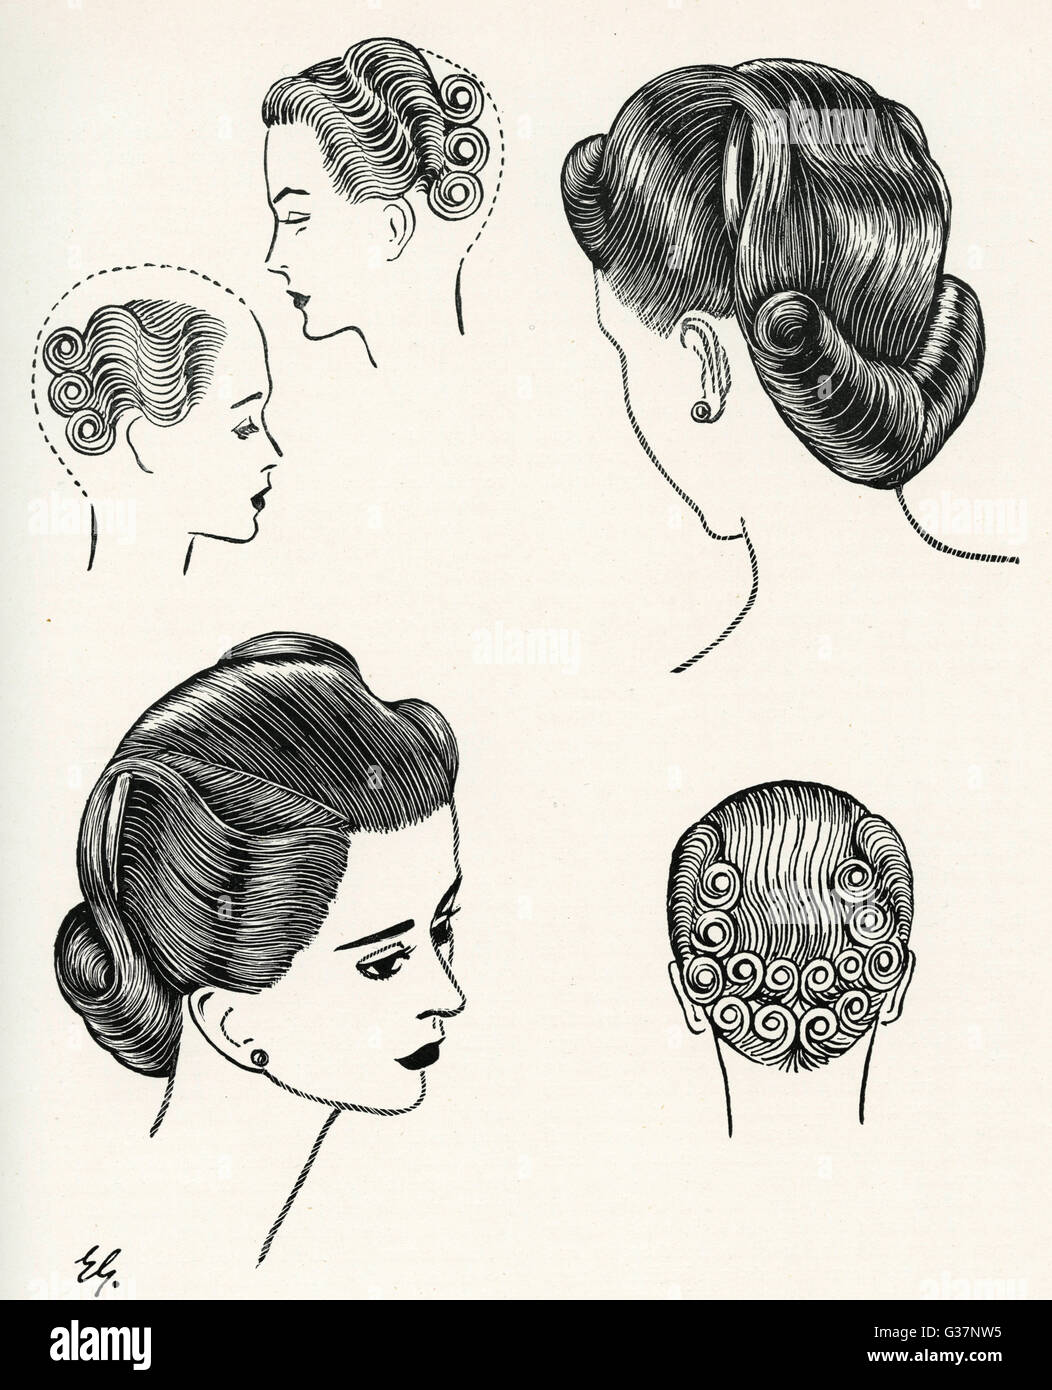 40s Hairstyles For Women